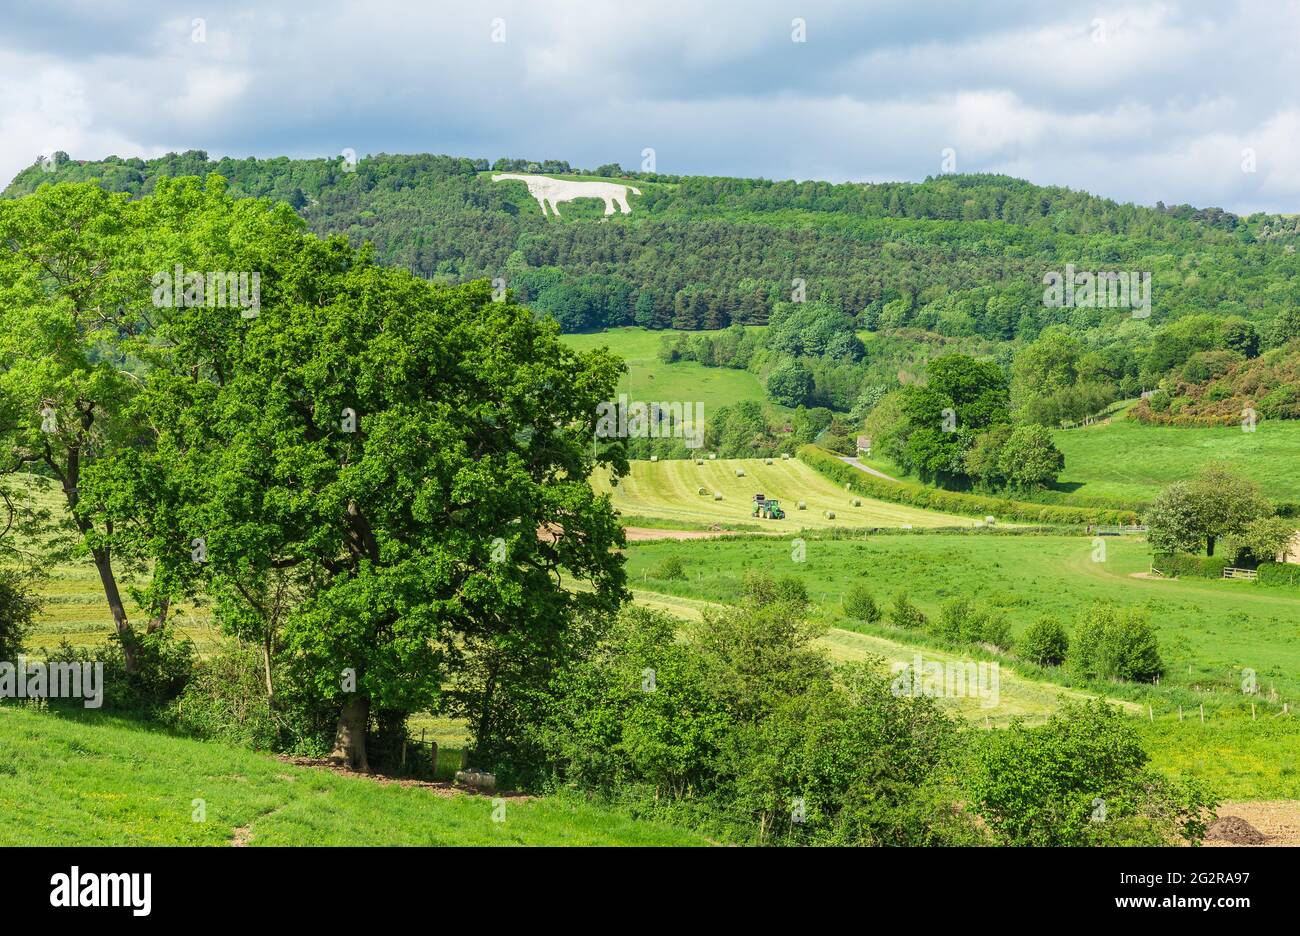 Haymaking in the rural, picturesque village of Kilburn, near Thirsk in North Yorkshire with the landmark hill figure of the White Horse of Kilburn in Stock Photo